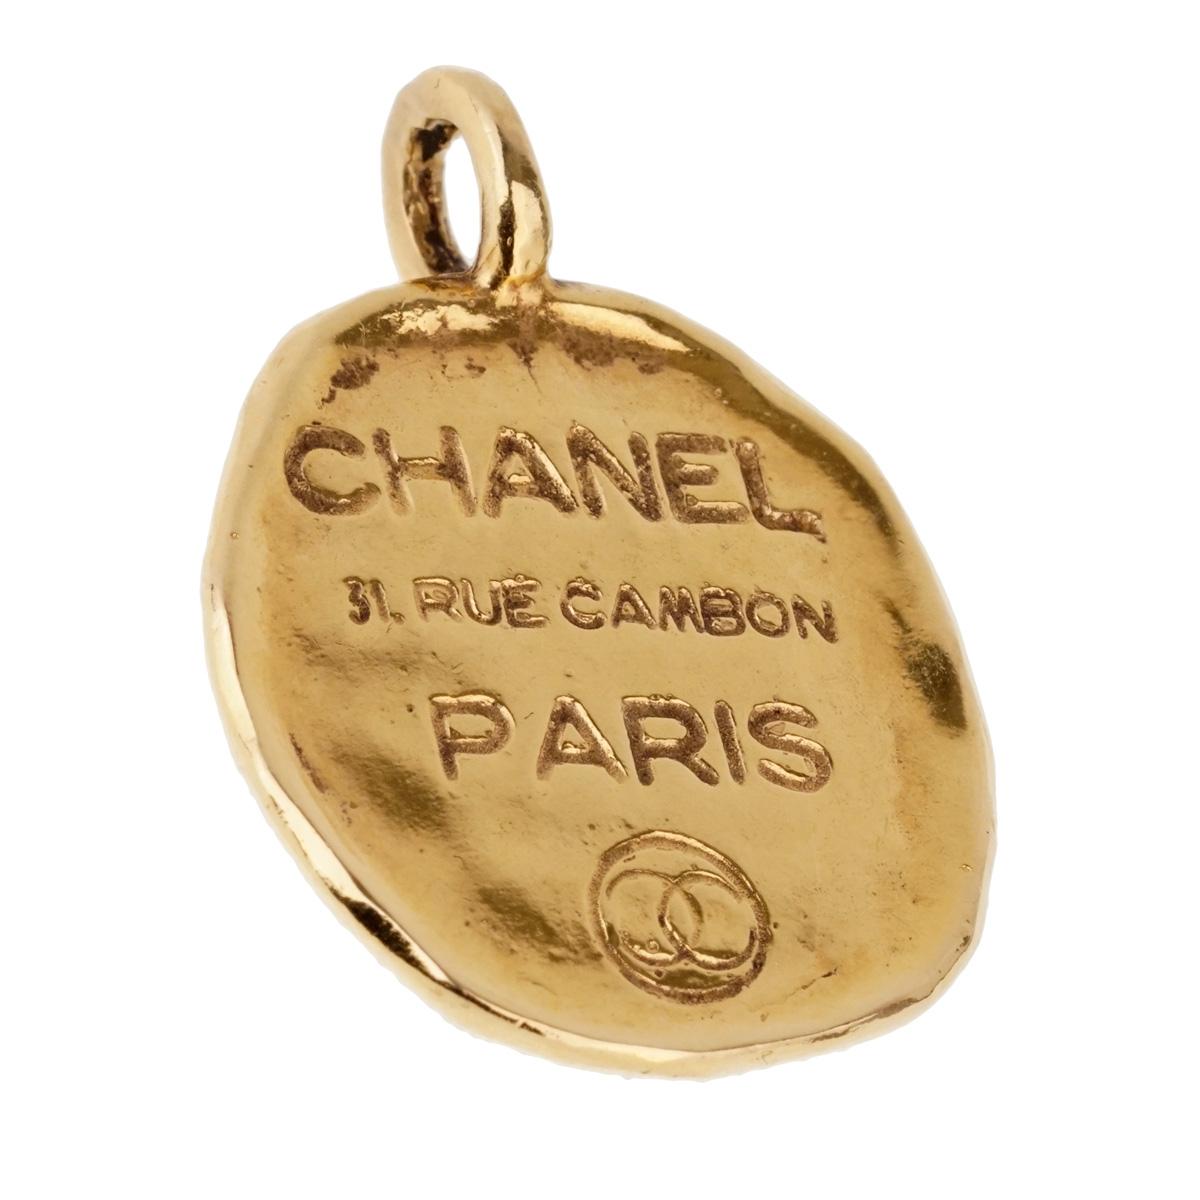 A vintage Chanel pendant engraved with the house of Chanel's address 31 Rue Cambon Paris in 18k yellow gold.